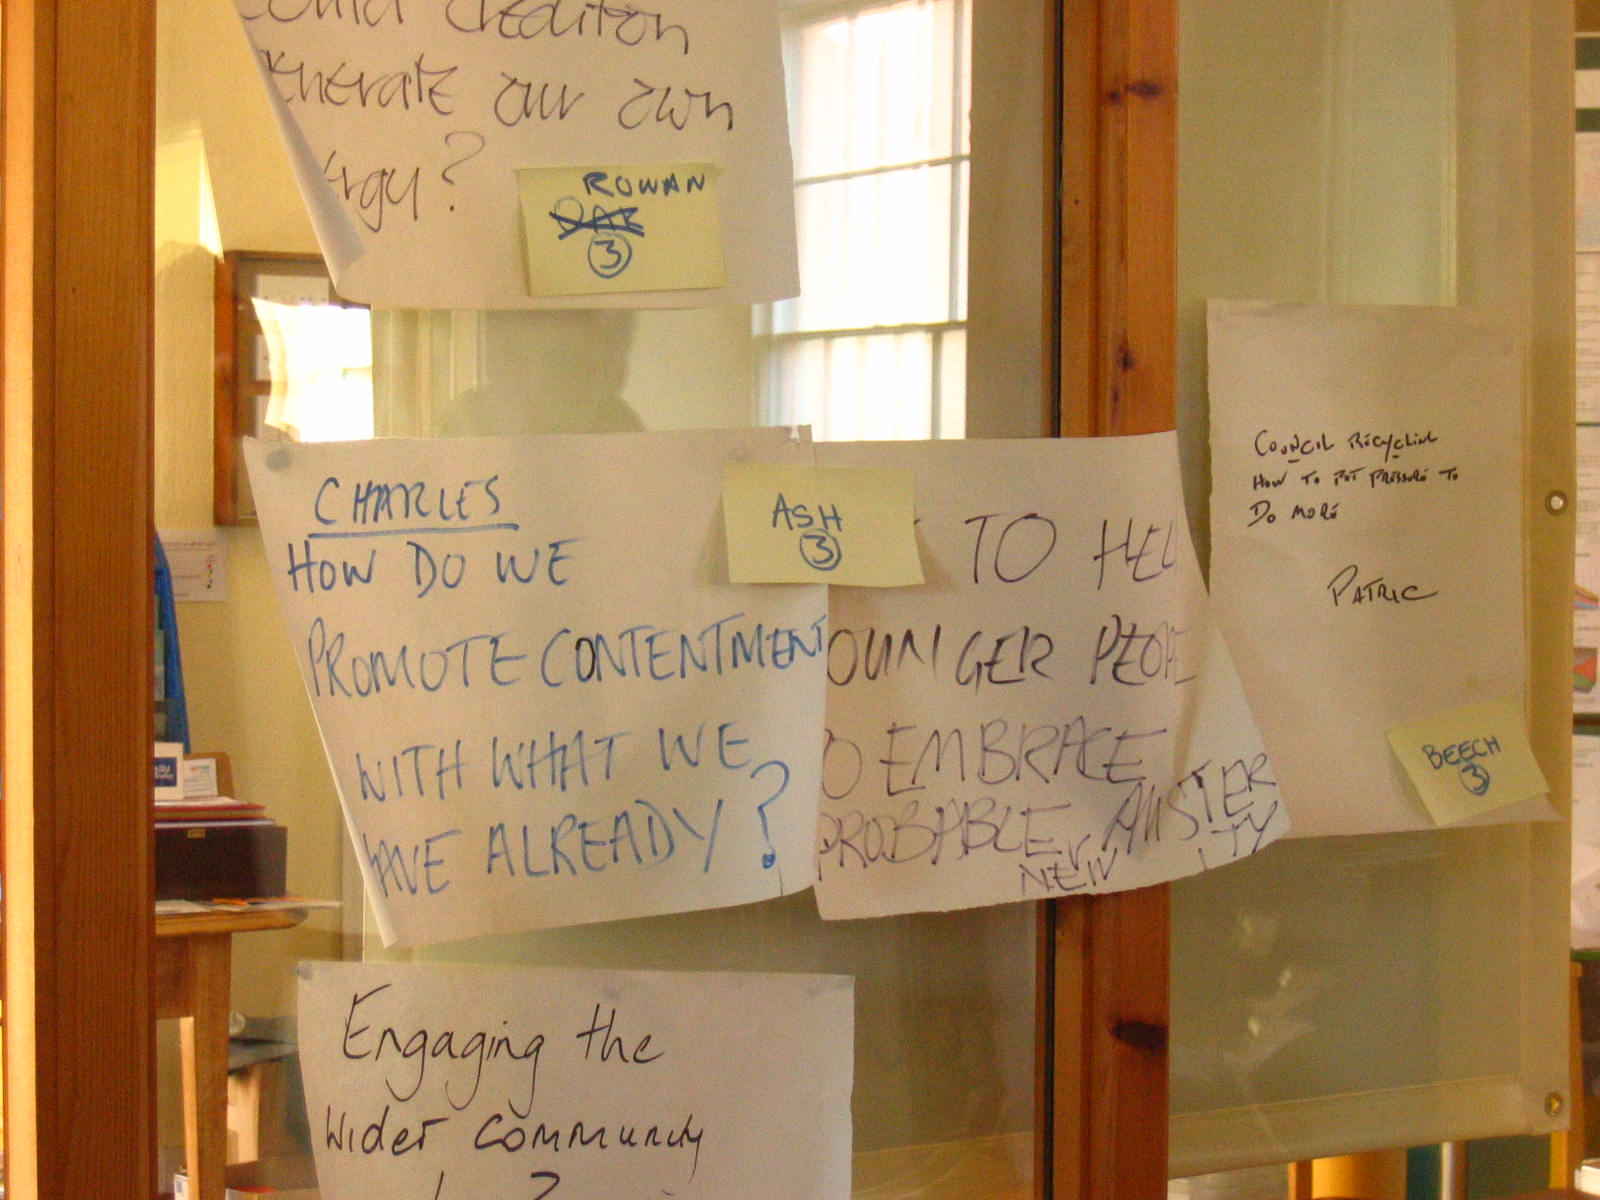 Photograph taken at the Climate Action Group Open Space workshop on 9th February 2008